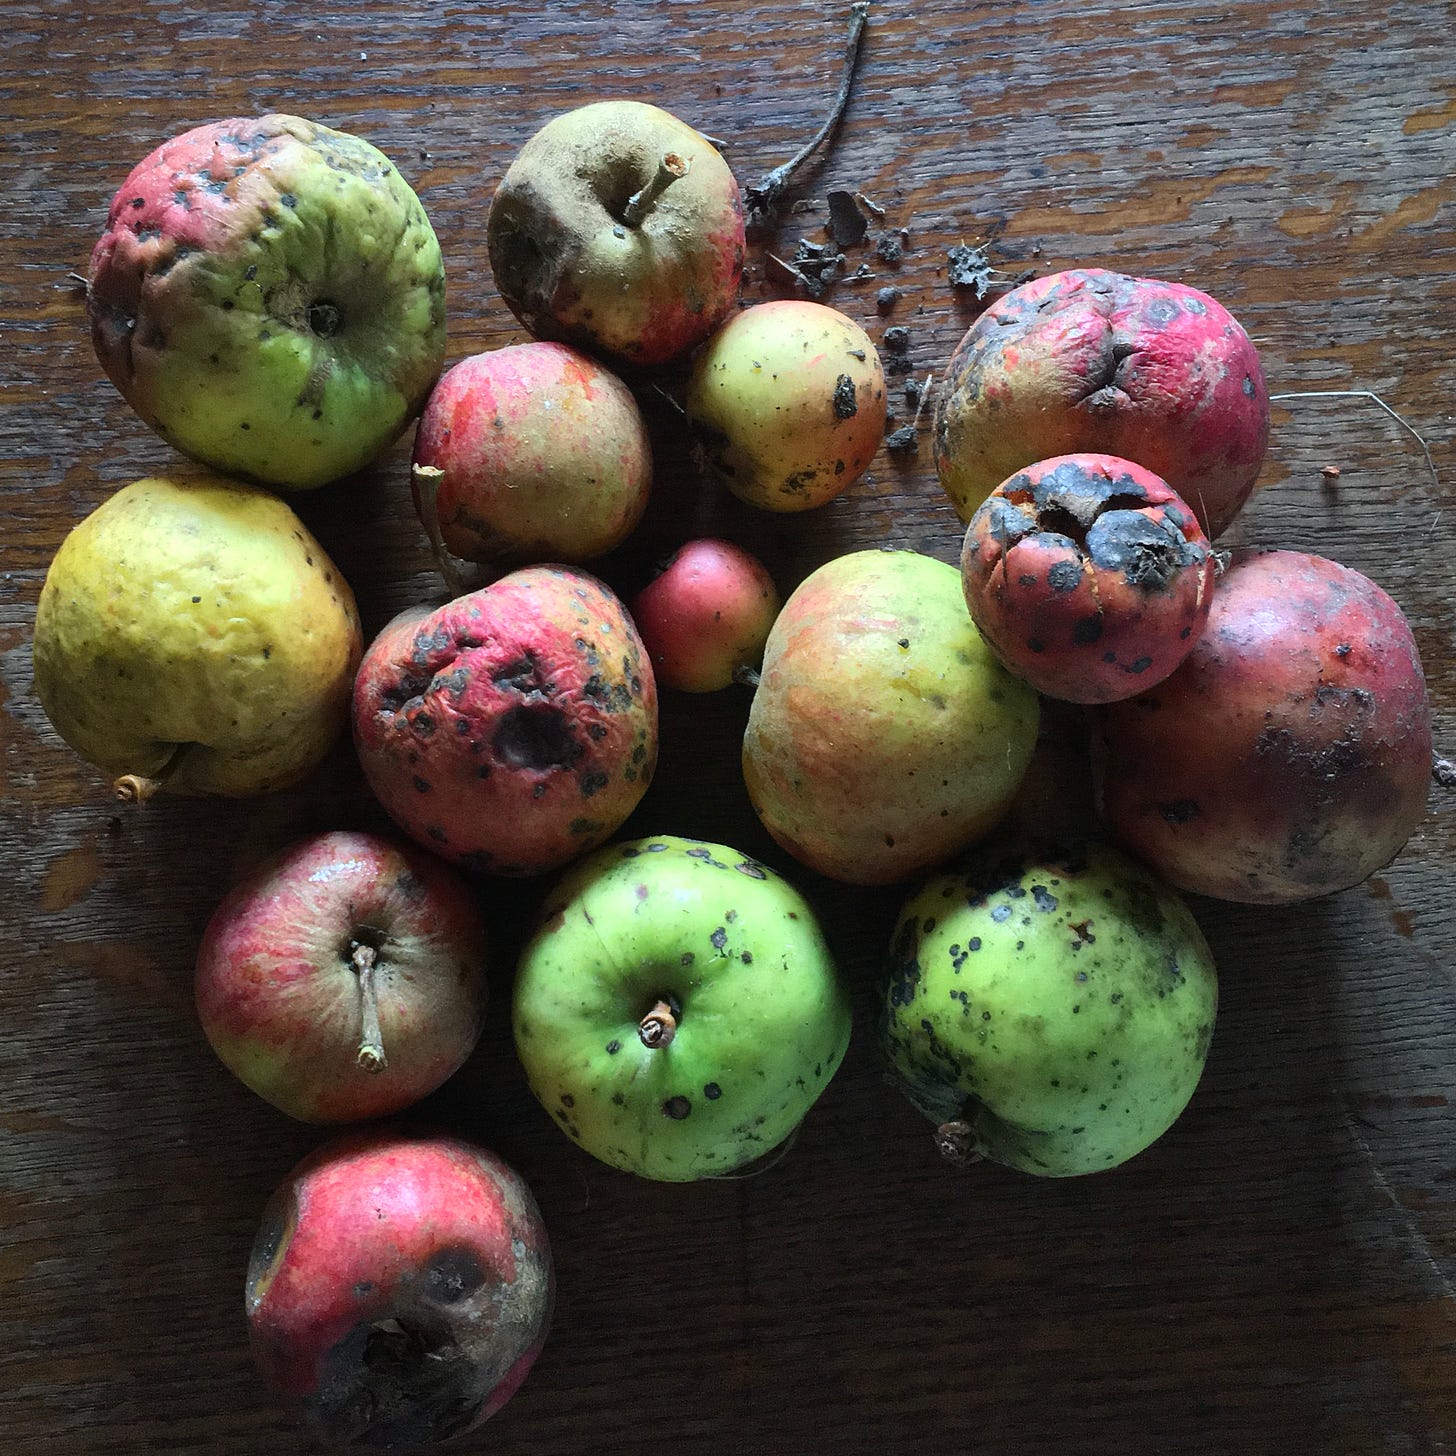 Feral apples of all sizes.